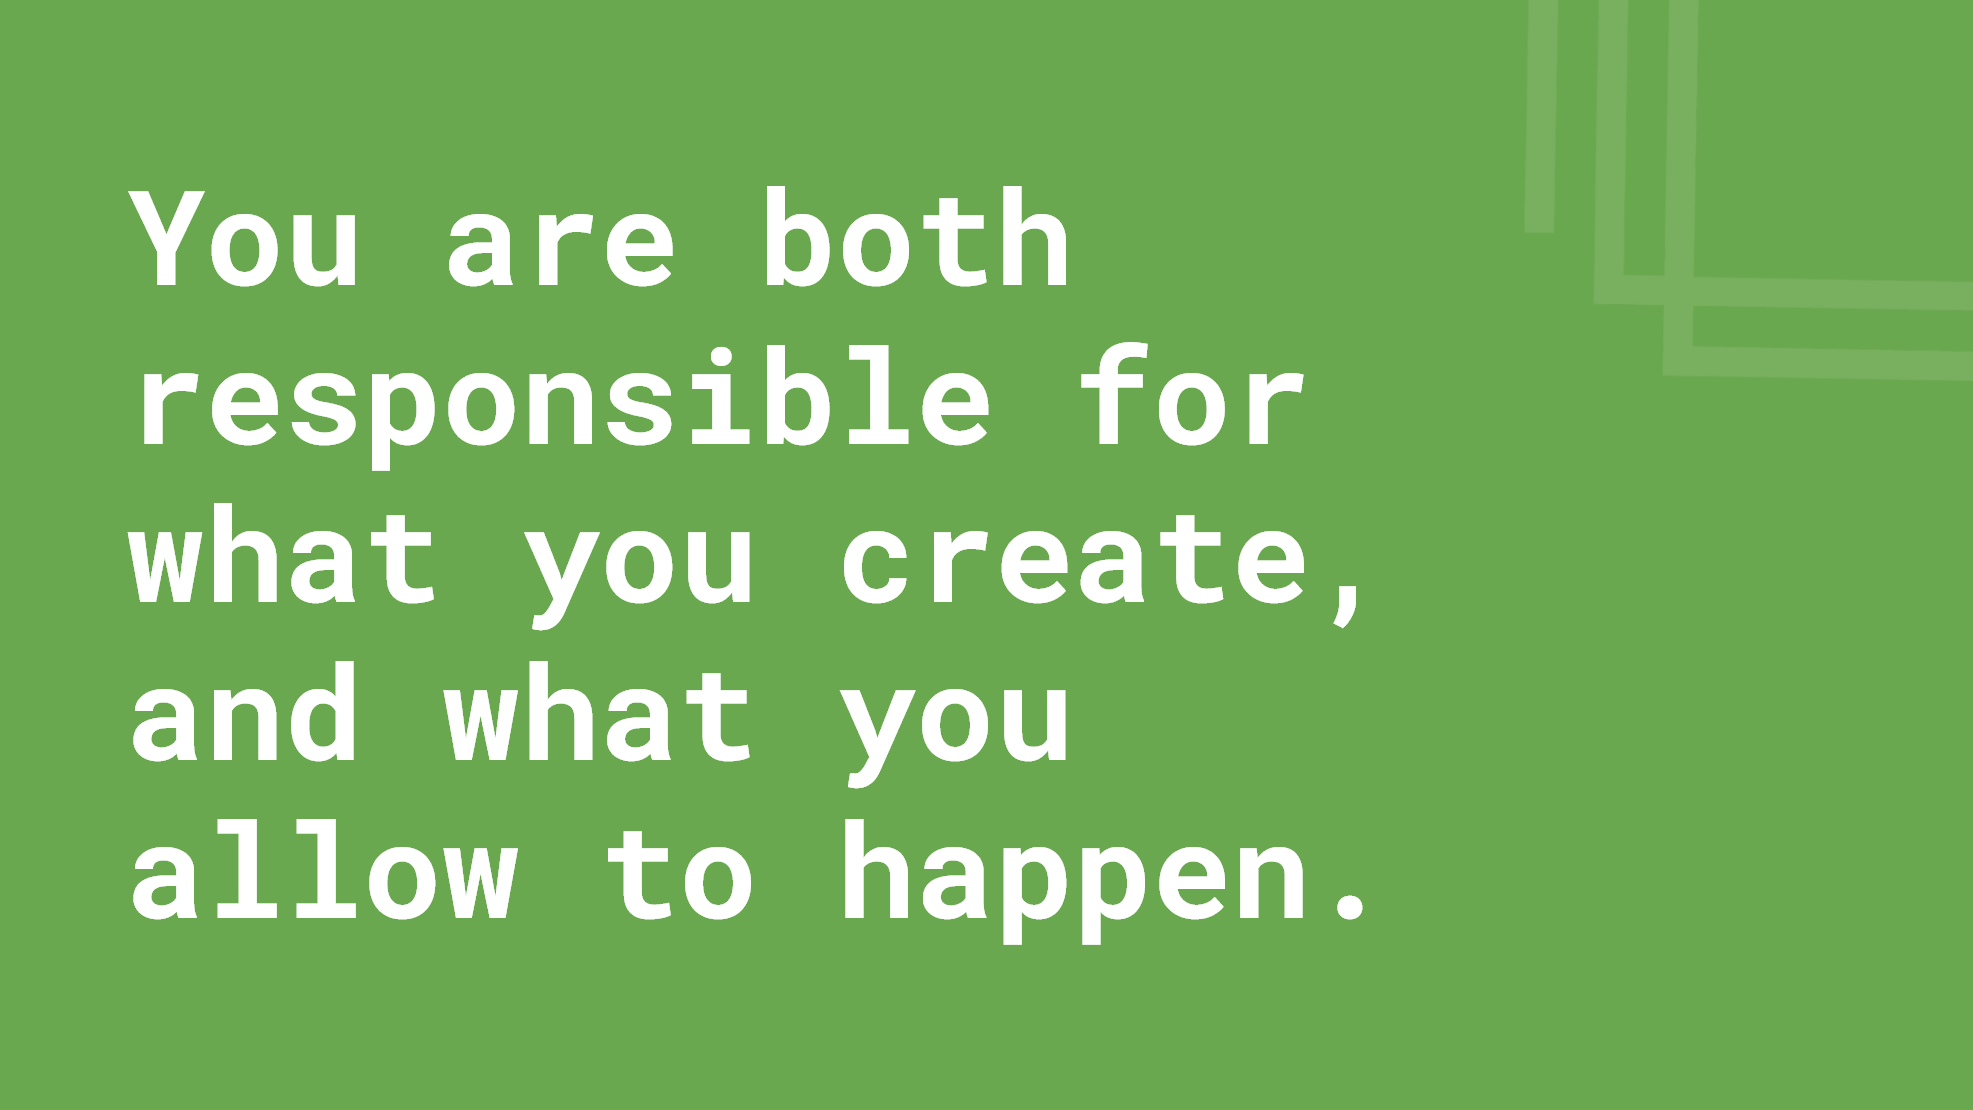 A key talk takeaway slide: "You are both responsible for what you create, and what you allow to happen."